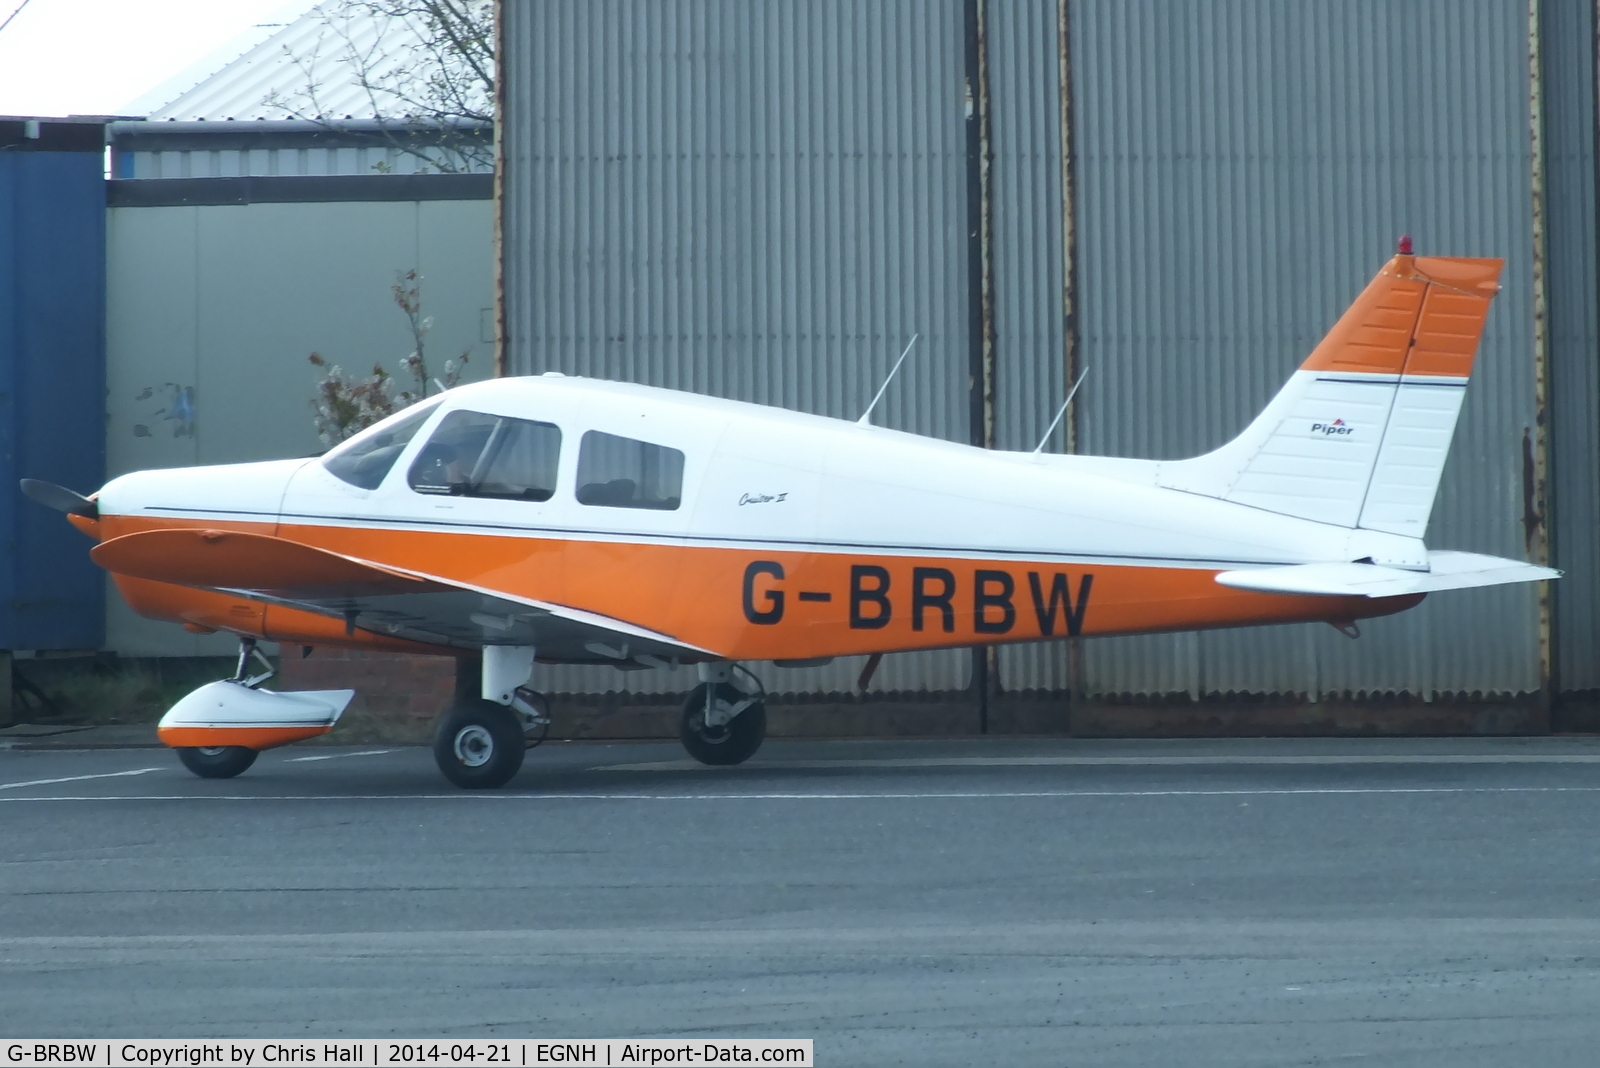 G-BRBW, 1974 Piper PA-28-140 Cherokee Cruiser C/N 28-7425153, Air Navigation and Trading Co